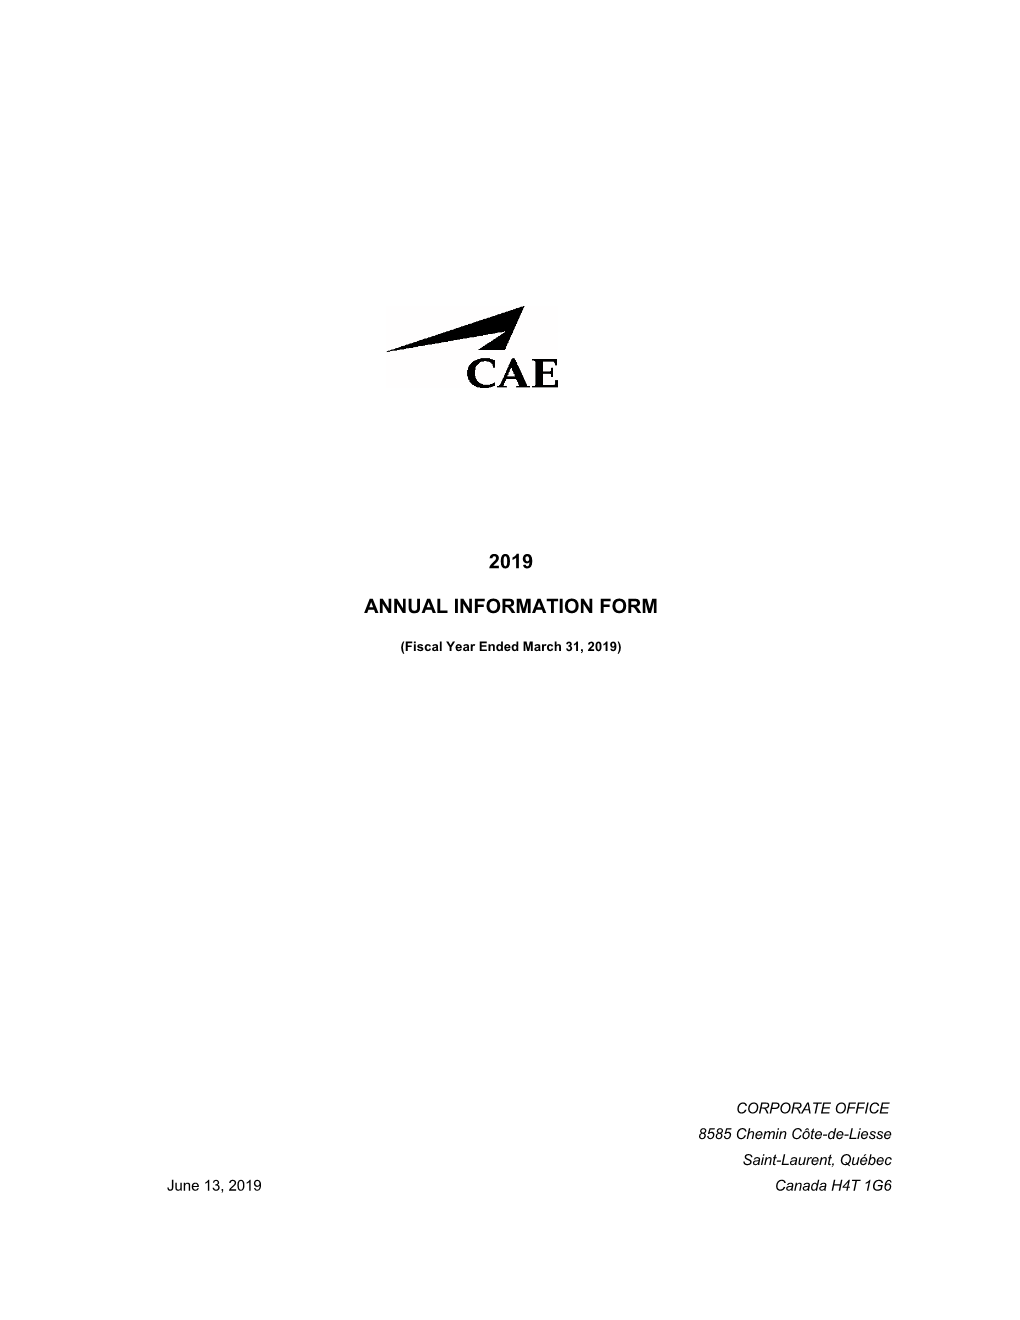 Financial Report to Shareholders for the Year Ended March 31, 2019 (Annual Financial Report)